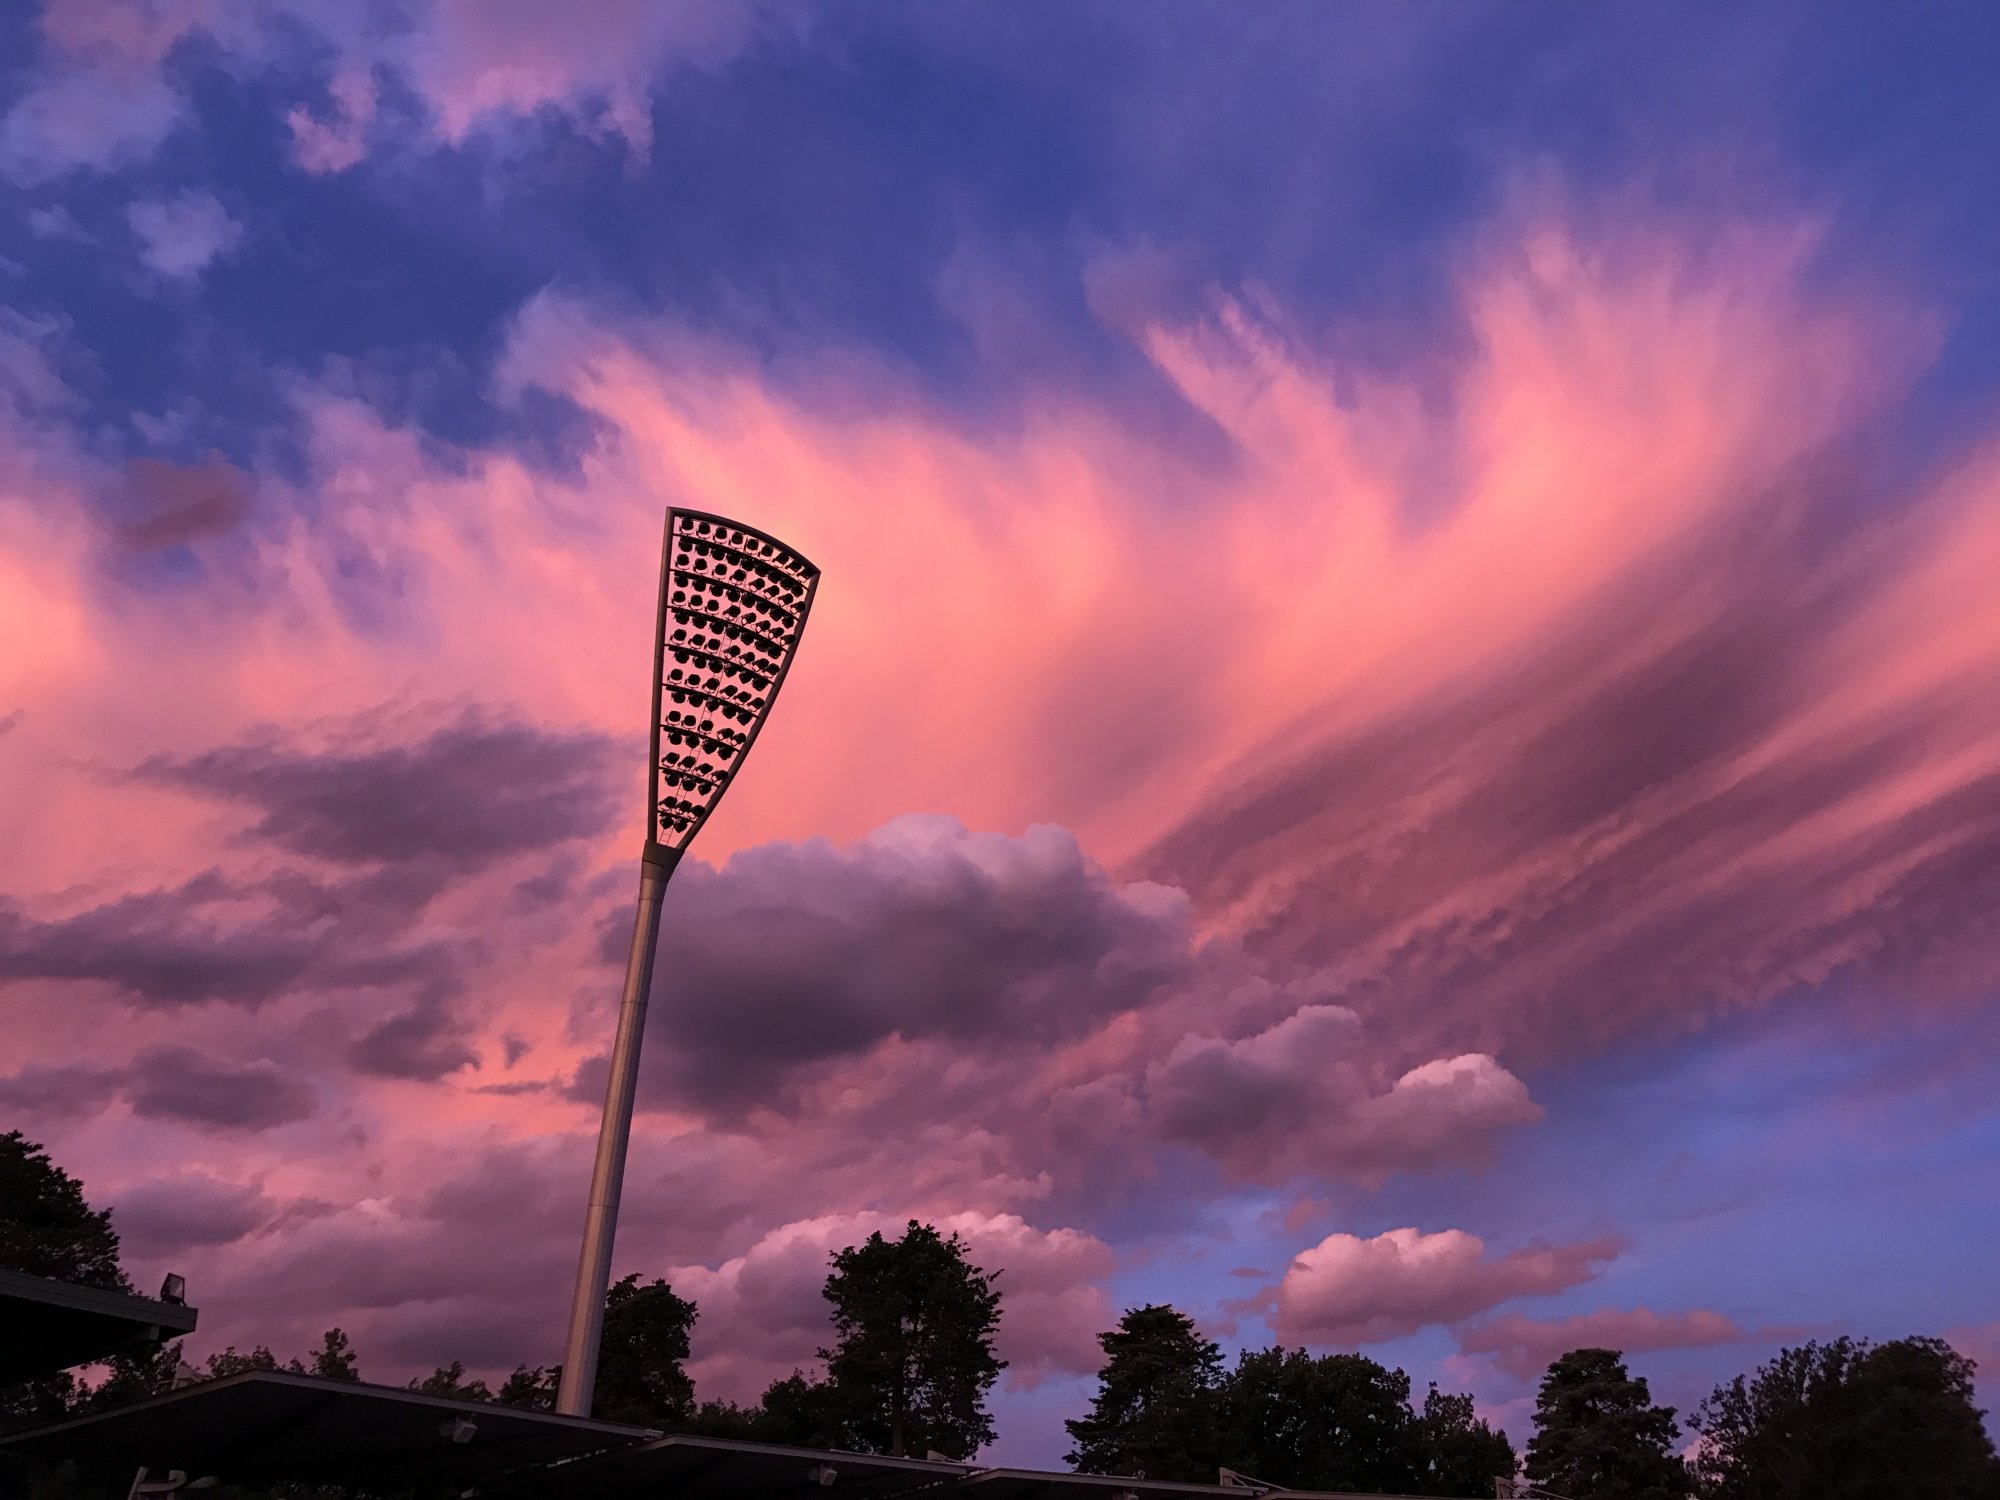 Feathered clouds at Manuka Oval. Photo: Charlotte Harper